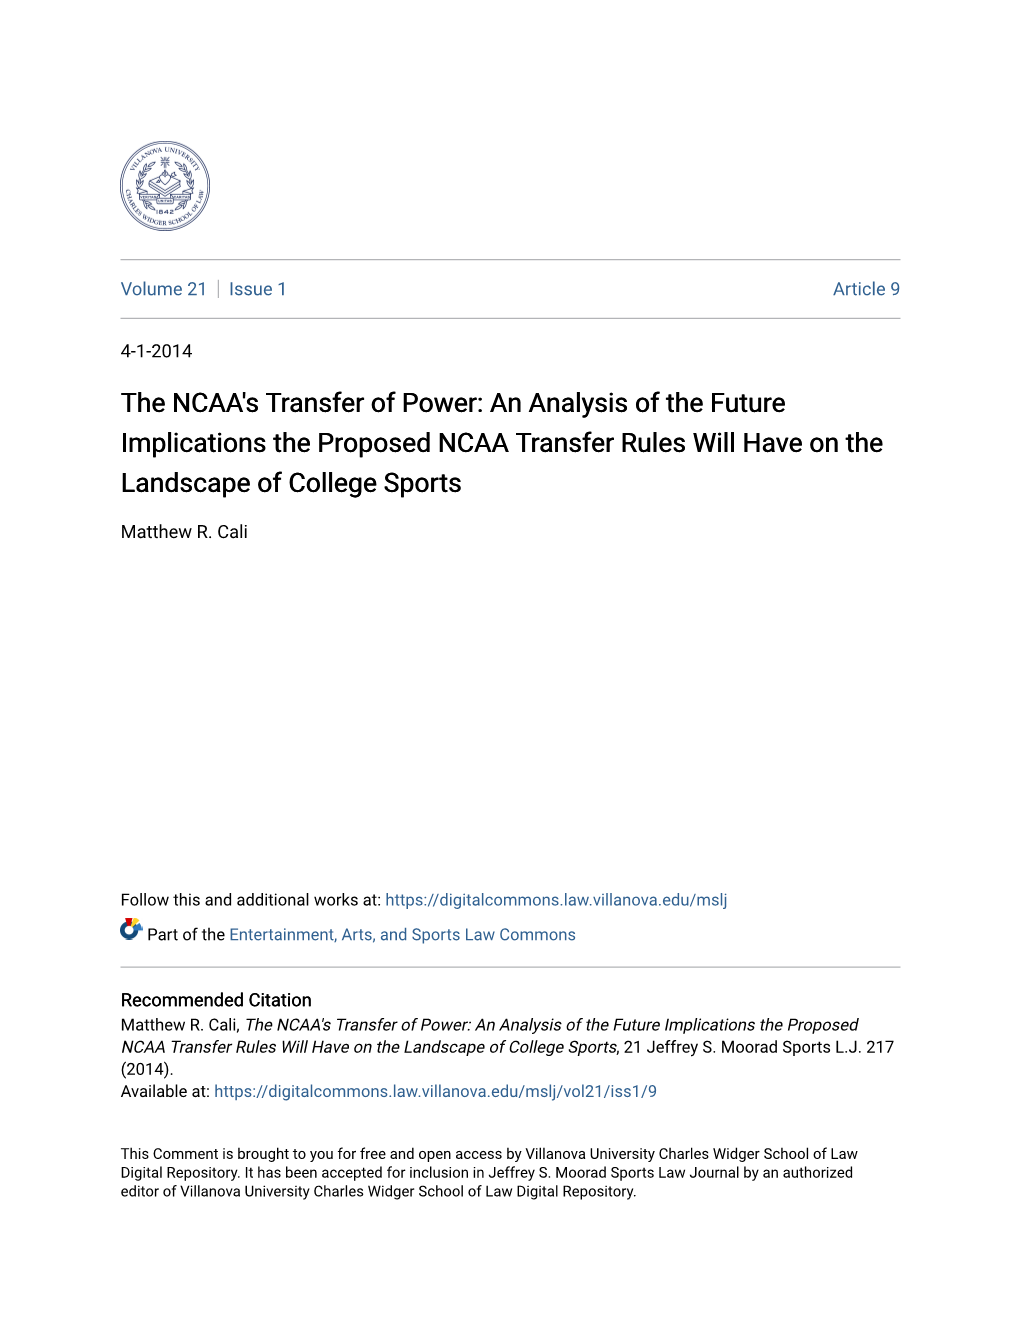 The NCAA's Transfer of Power: an Analysis of the Future Implications the Proposed NCAA Transfer Rules Will Have on the Landscape of College Sports